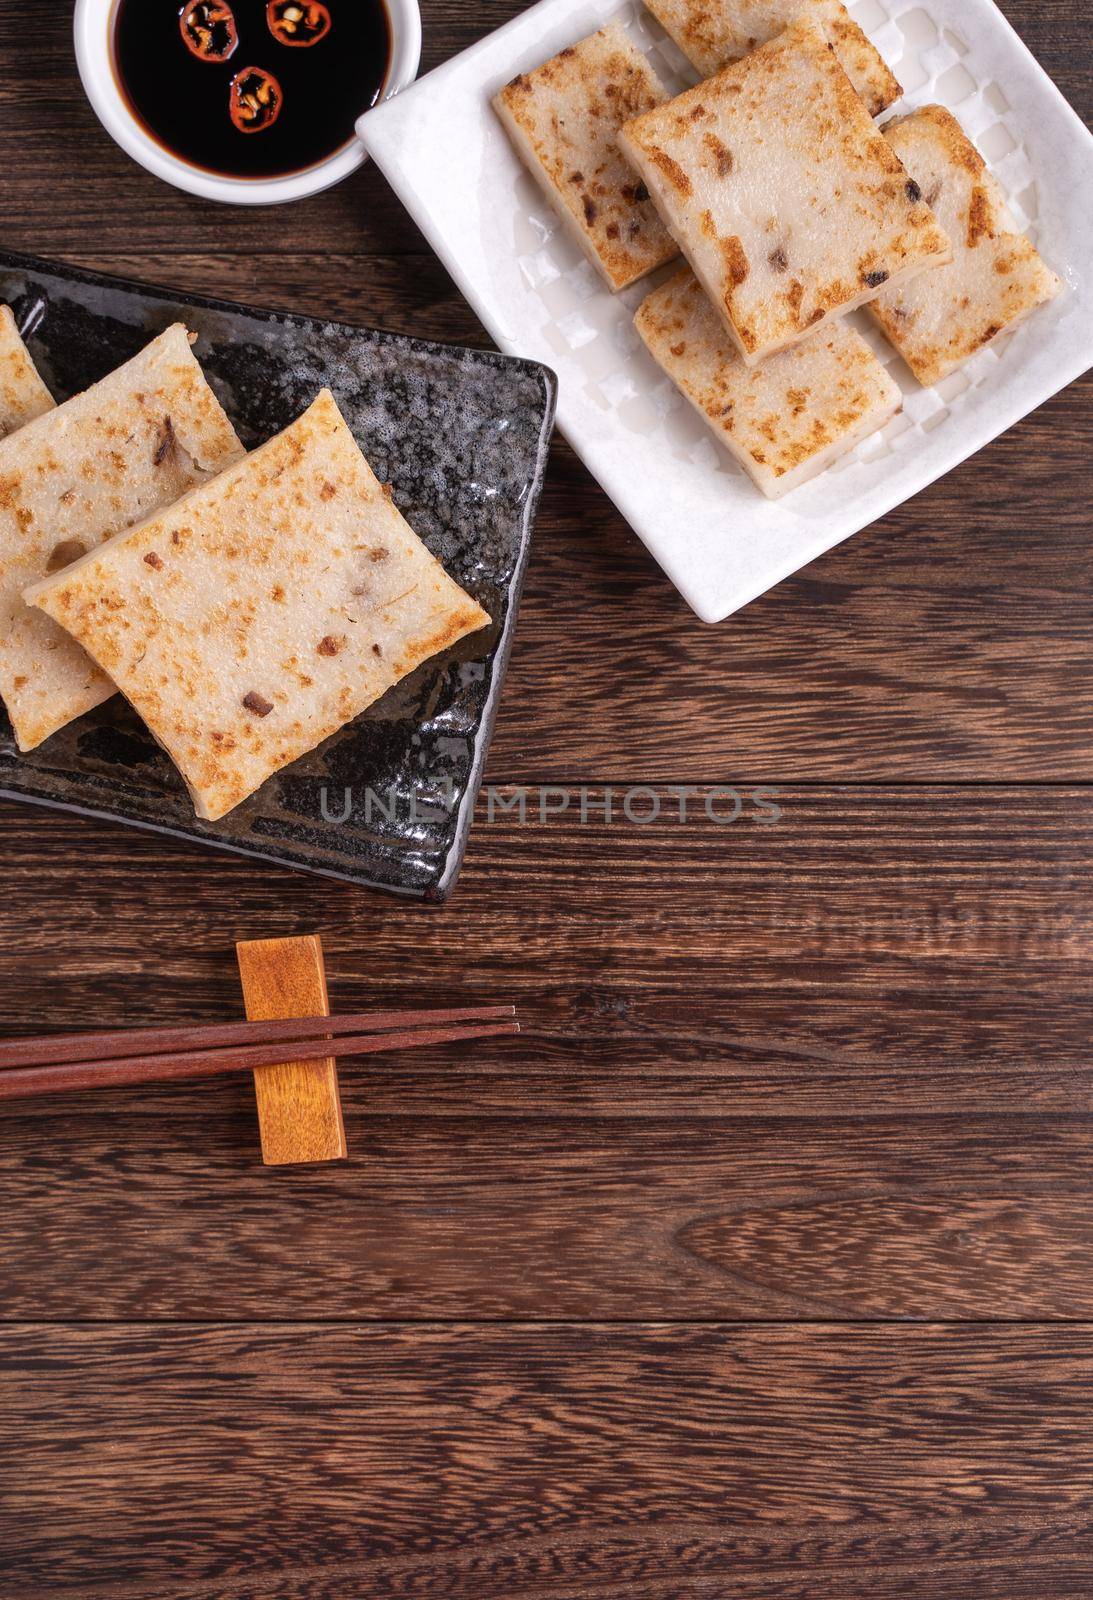 Delicious turnip cake, Chinese traditional local radish cake in restaurant with soy sauce and chopsticks, close up, copy space, top view, flat lay.